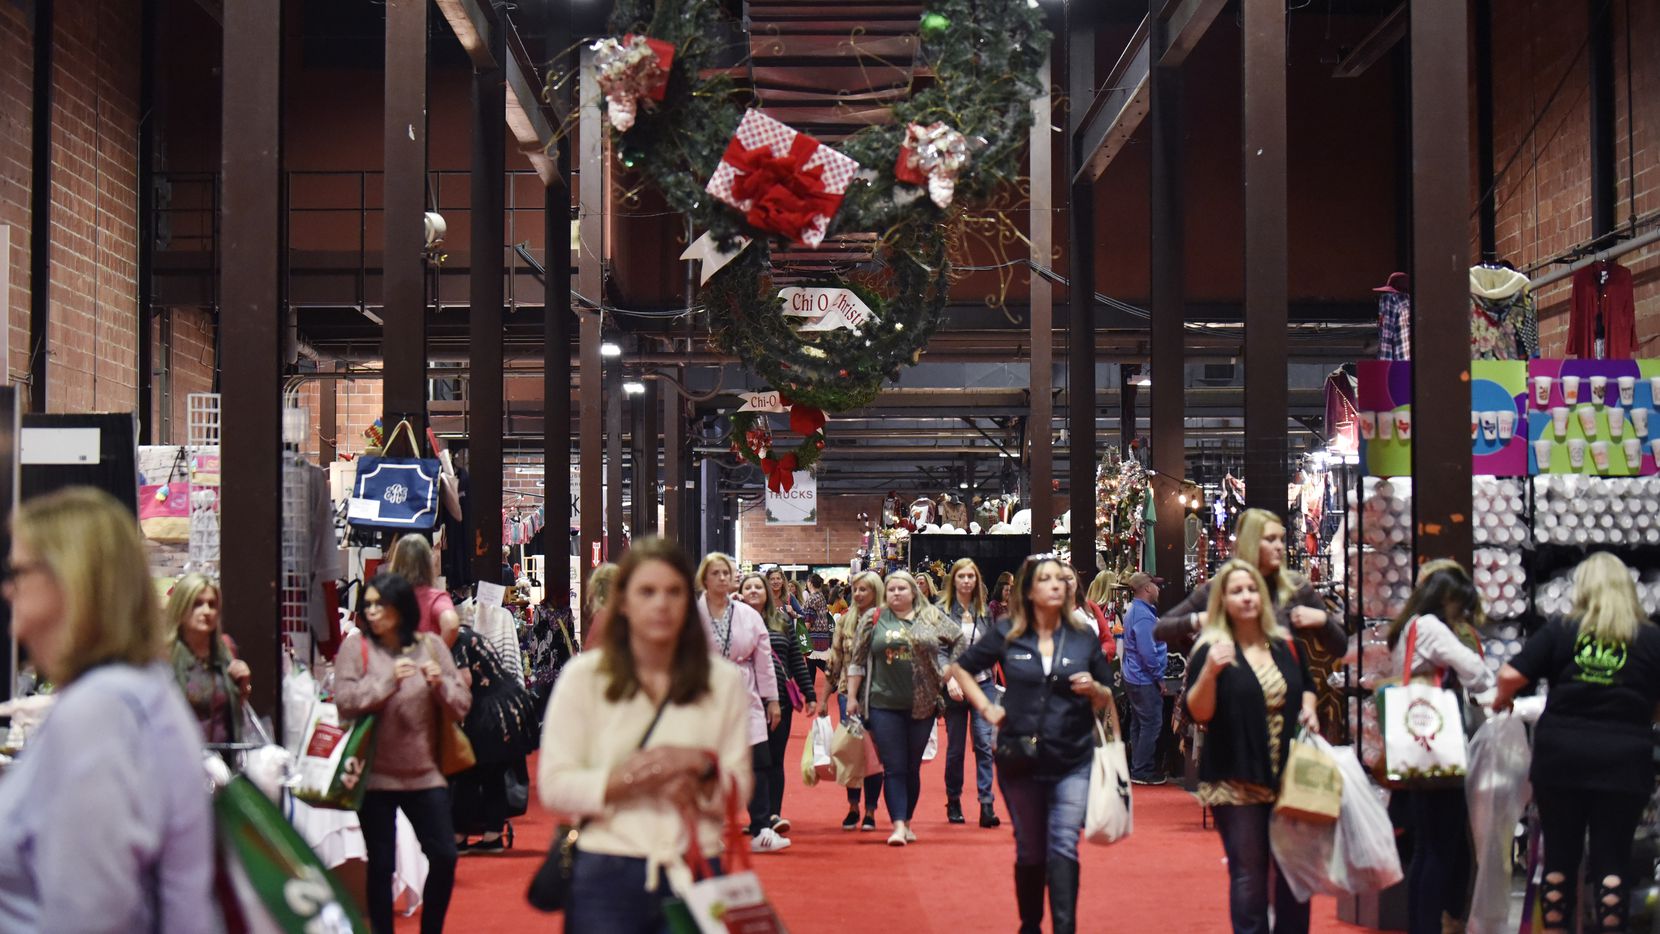 Shoppers walked the main market floor Thursday evening during the Chi Omega Christmas Market at Fair Park in Dallas. The market runs through Saturday.